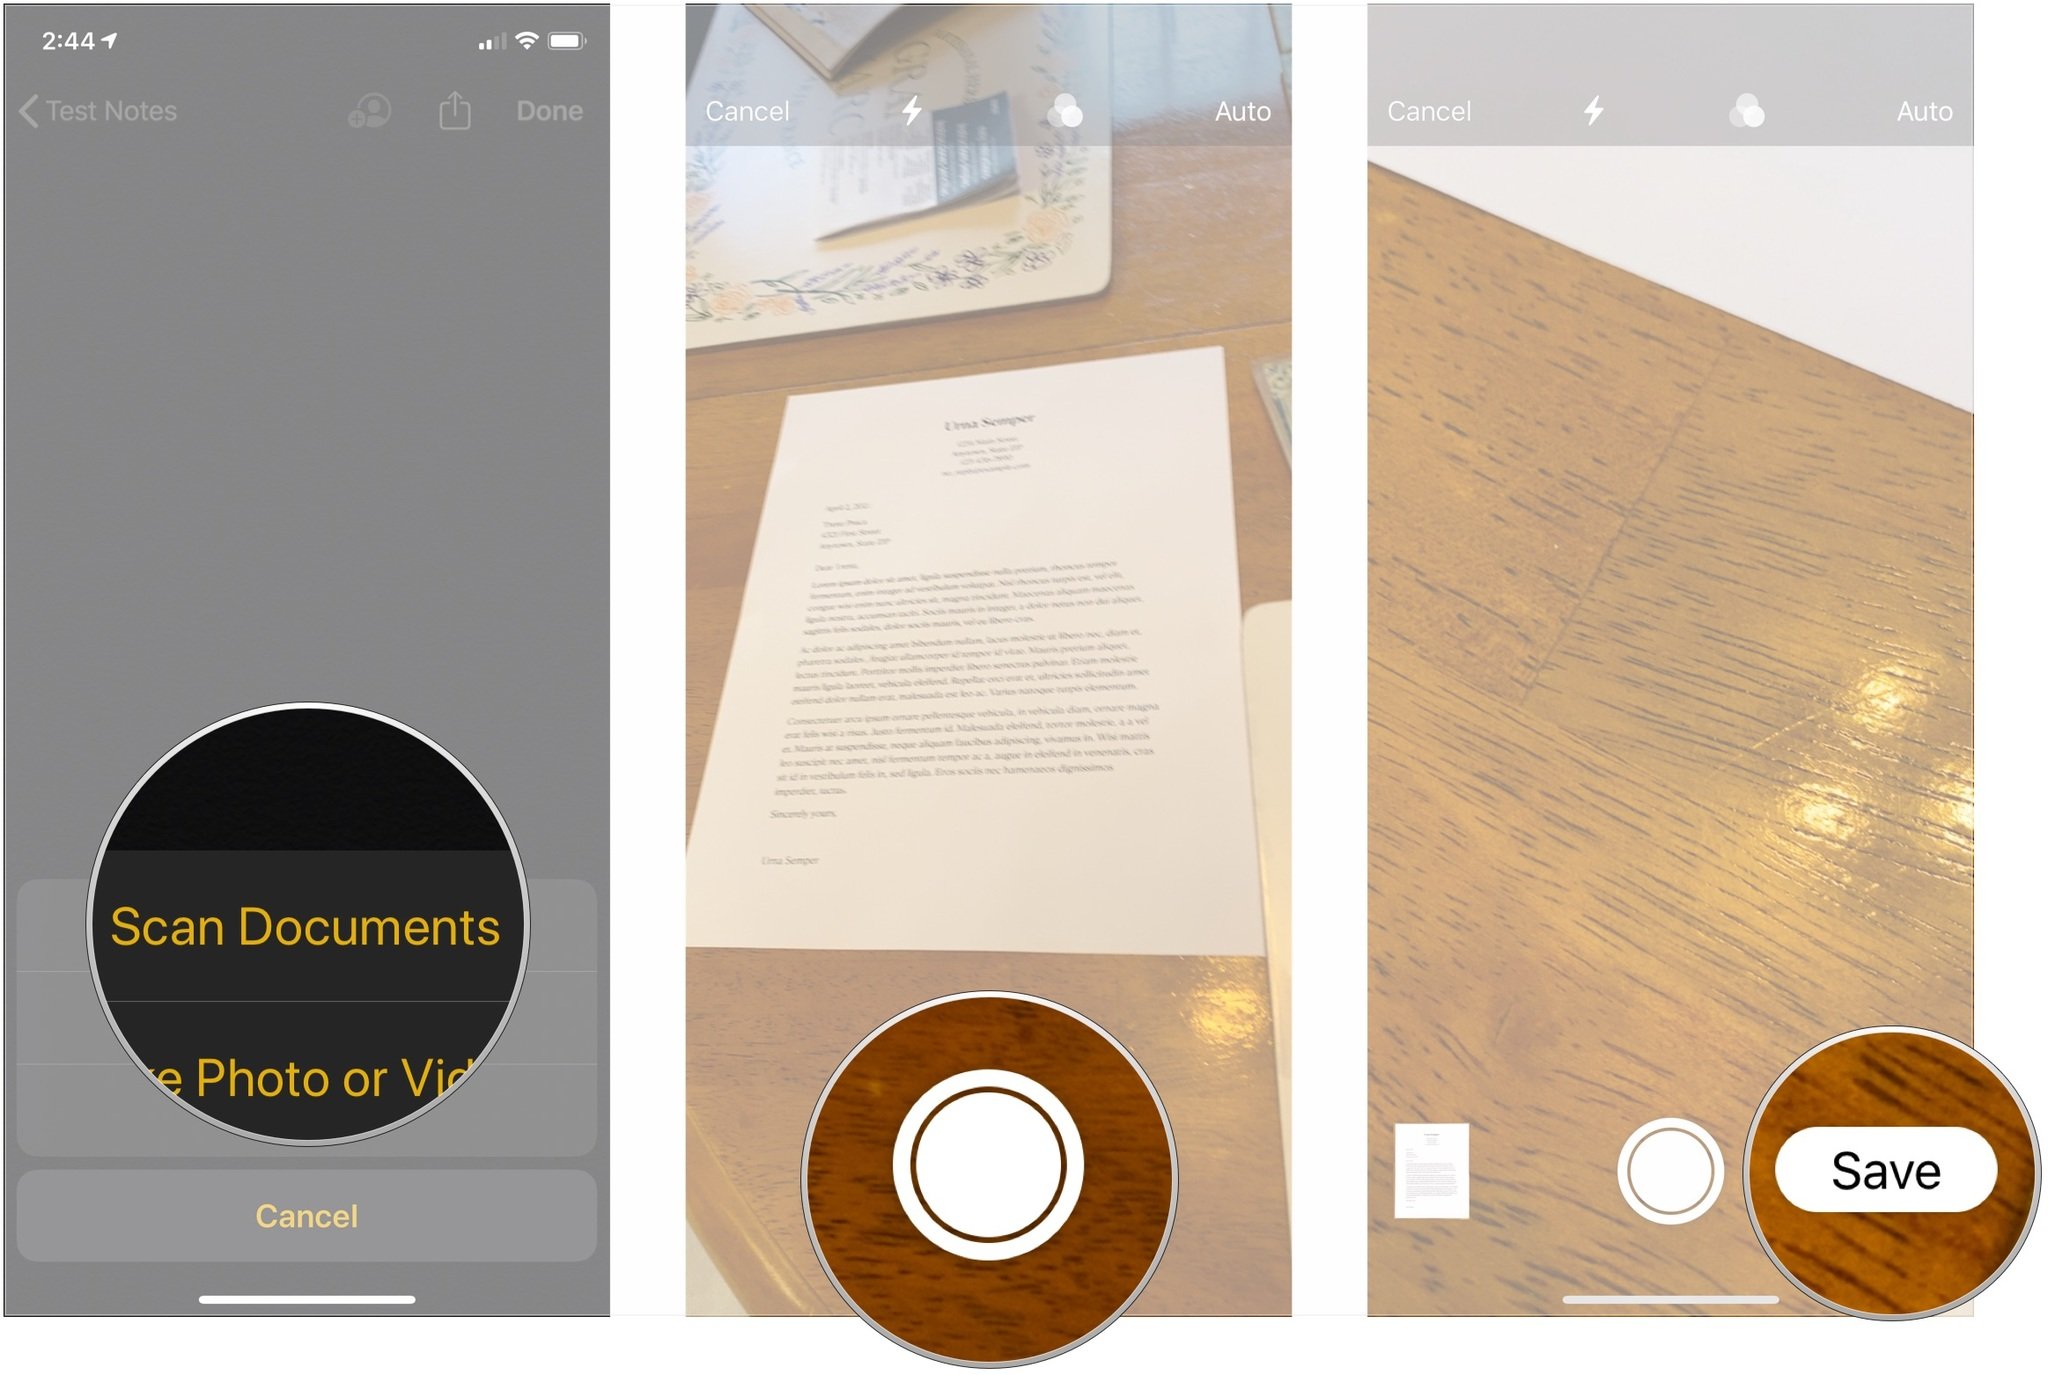 How to scan documents, showing how to tap Scan Documents, tap the shutter button, then tap Save